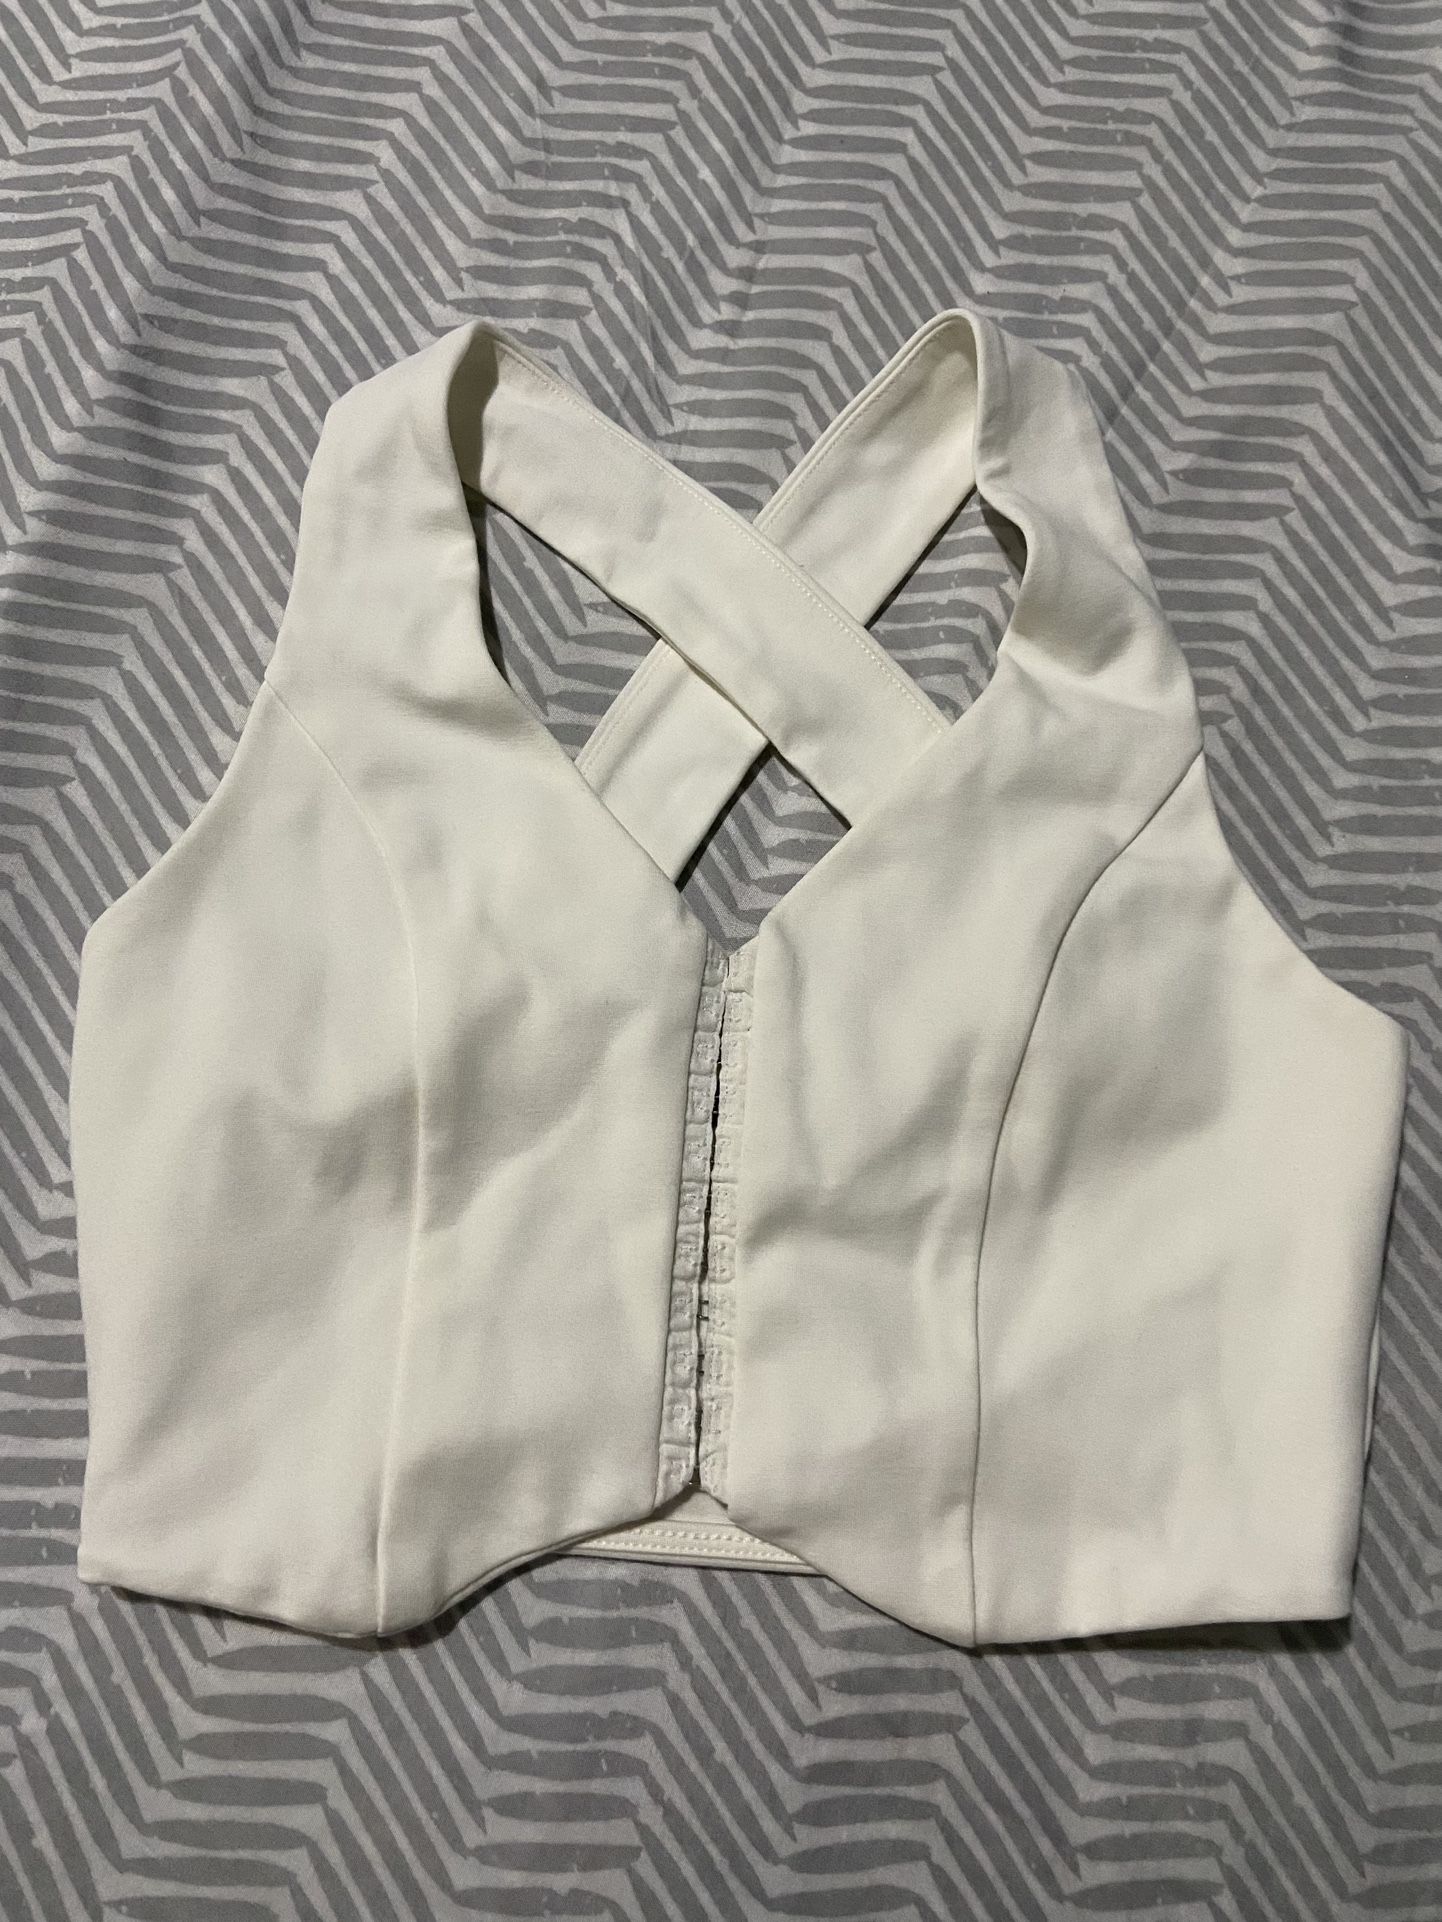 Forever 21 Corset Top